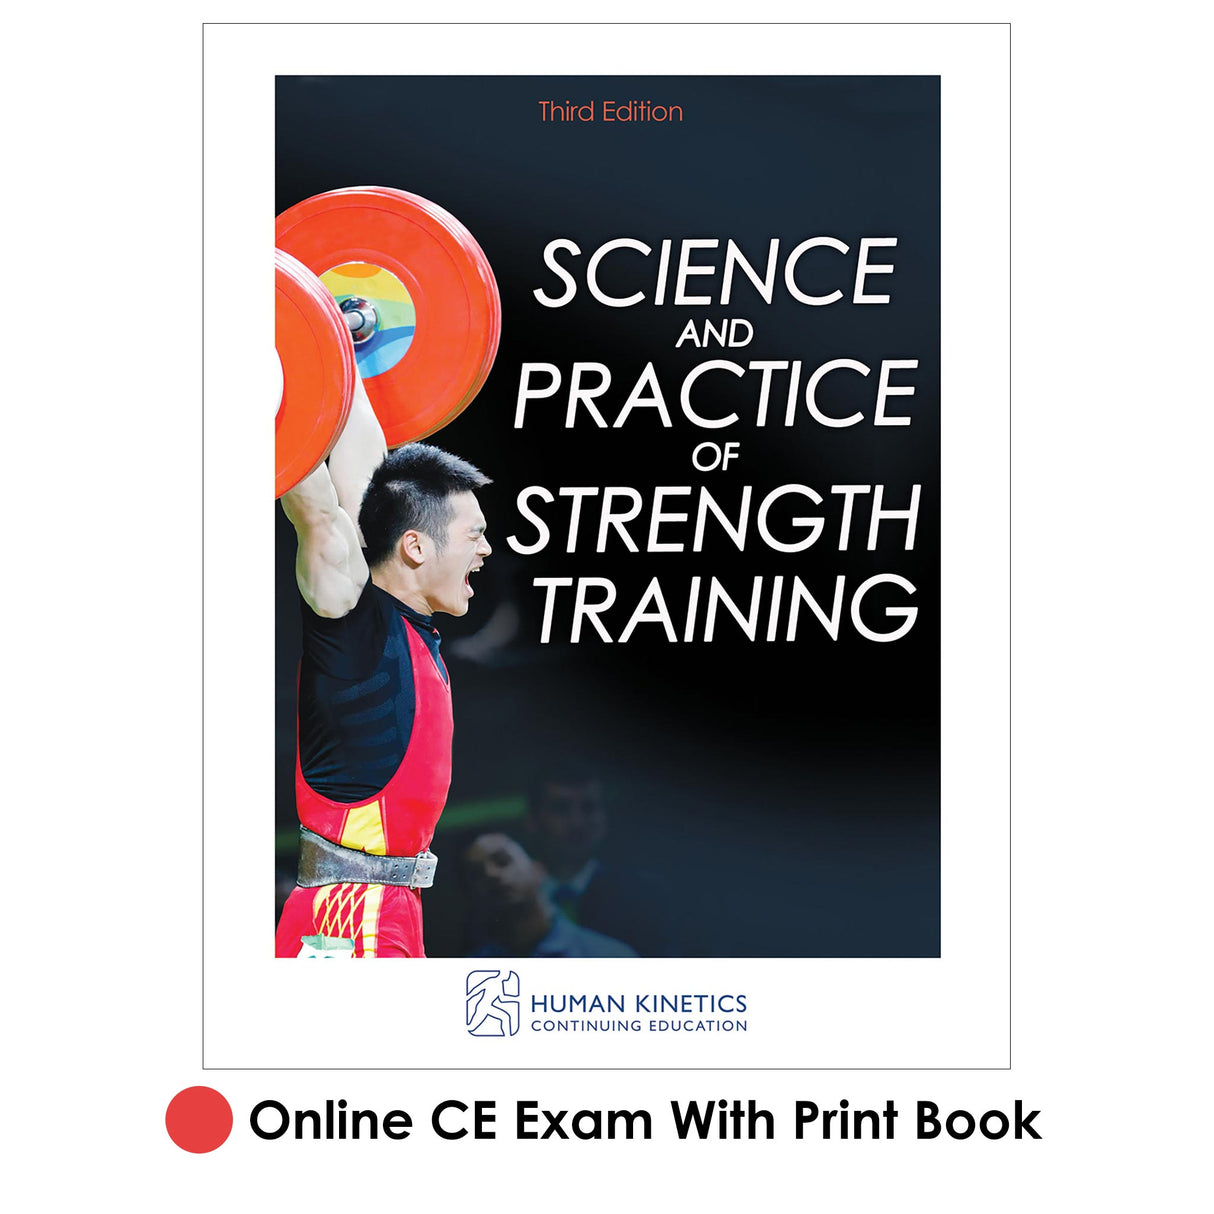 Science and Practice of Strength Training 3rd Edition Online CE Exam With Print Book